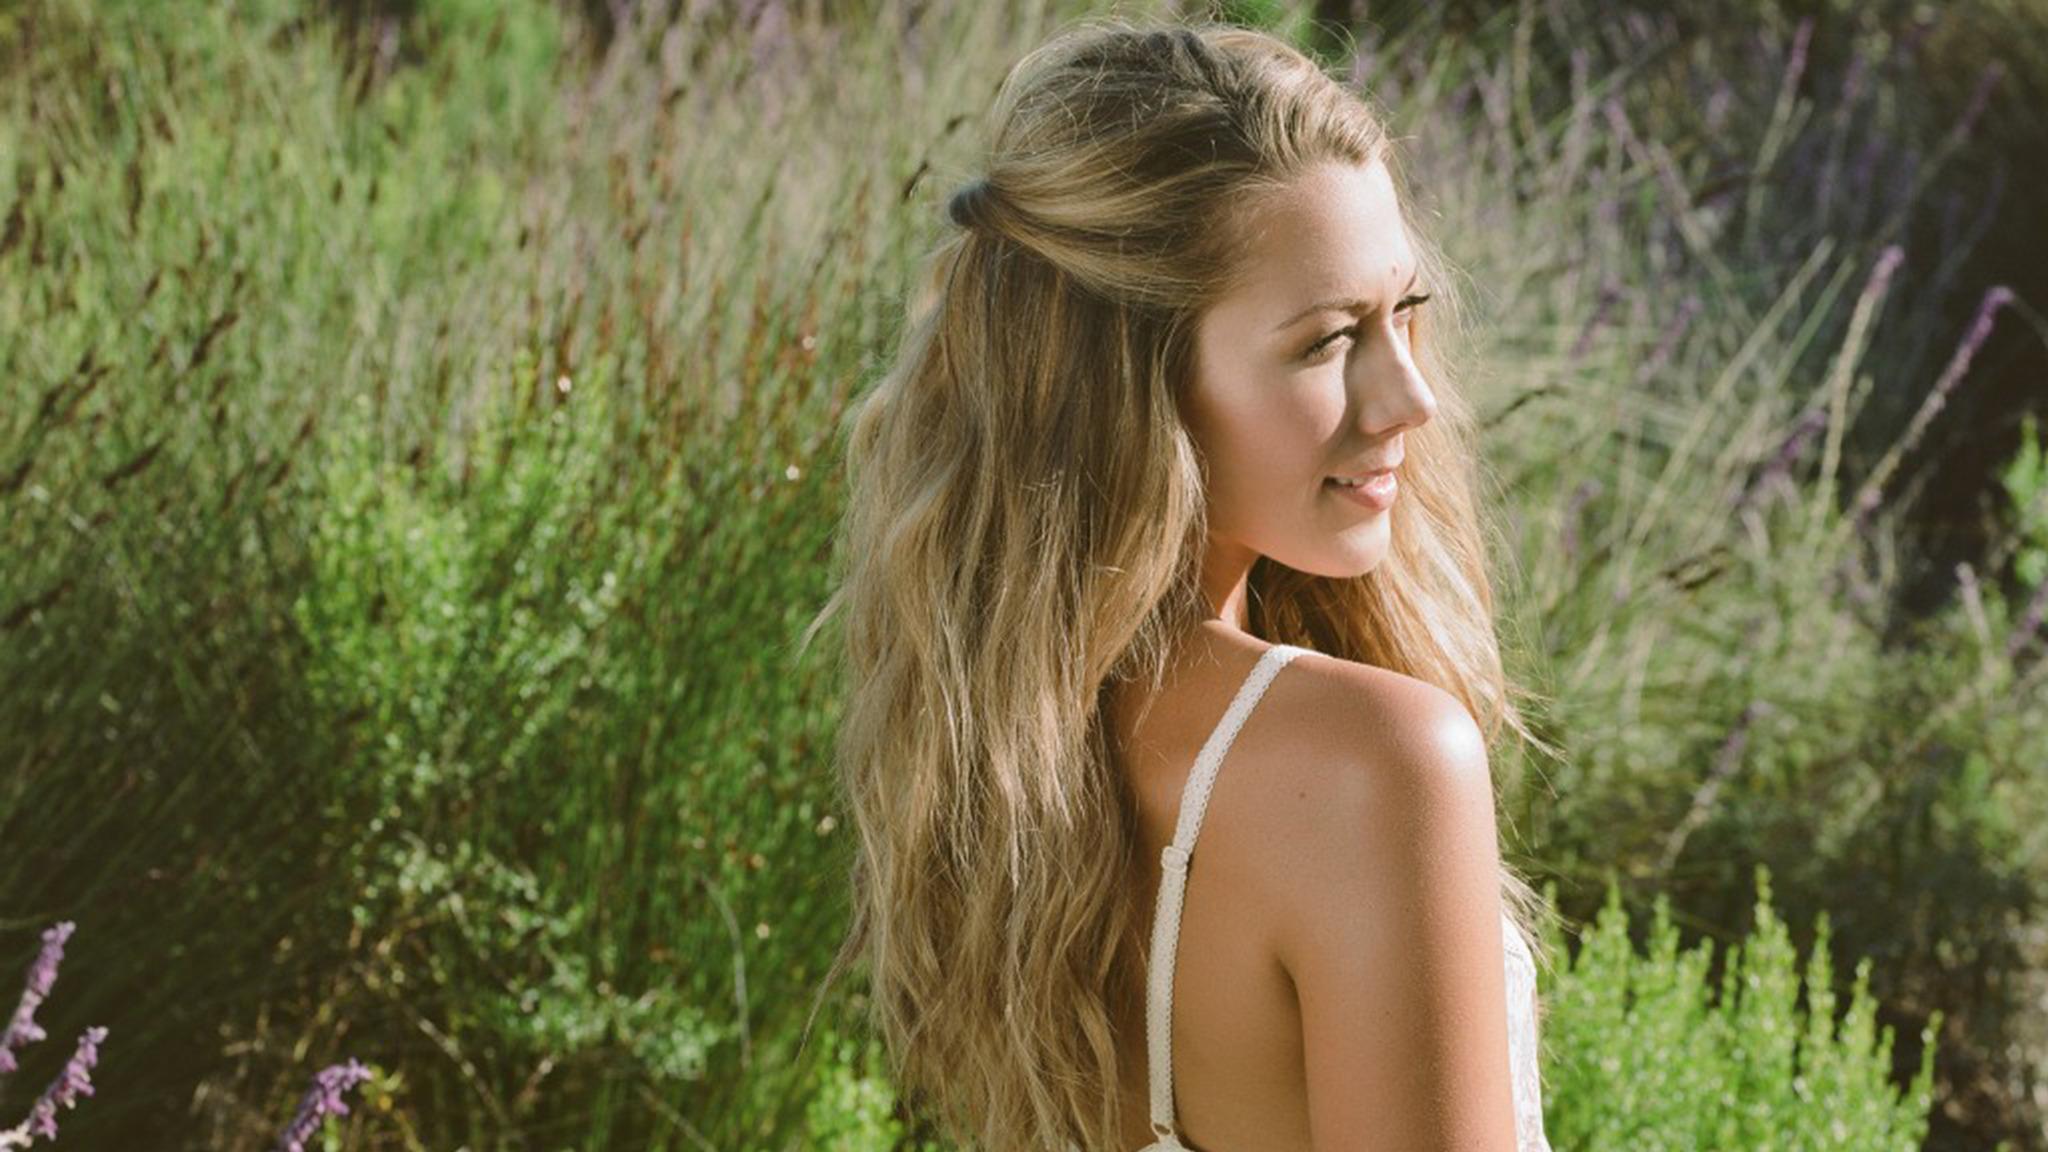 Colbie Caillat pre-sale code for early tickets in Reno